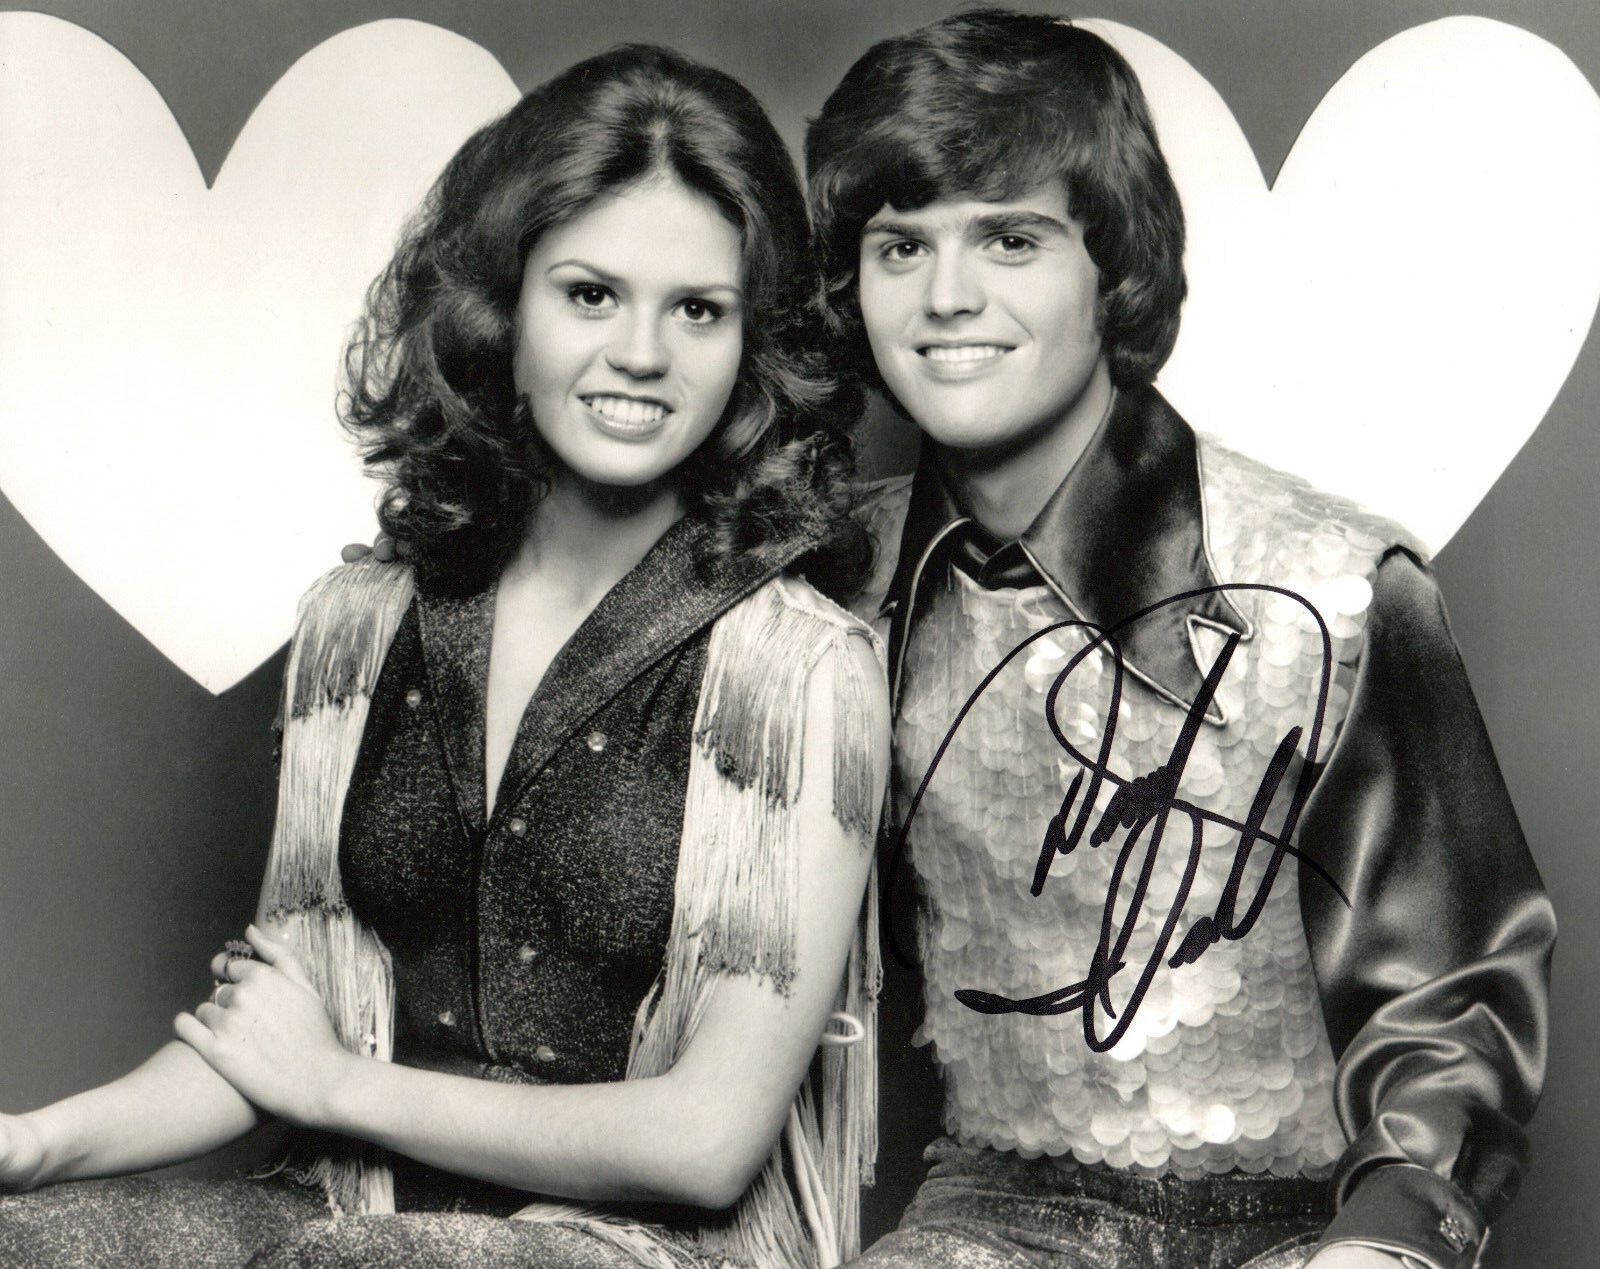 GFA The Osmonds Star * DONNY OSMOND * Signed 8x10 Photo Poster painting PROOF AD1 COA